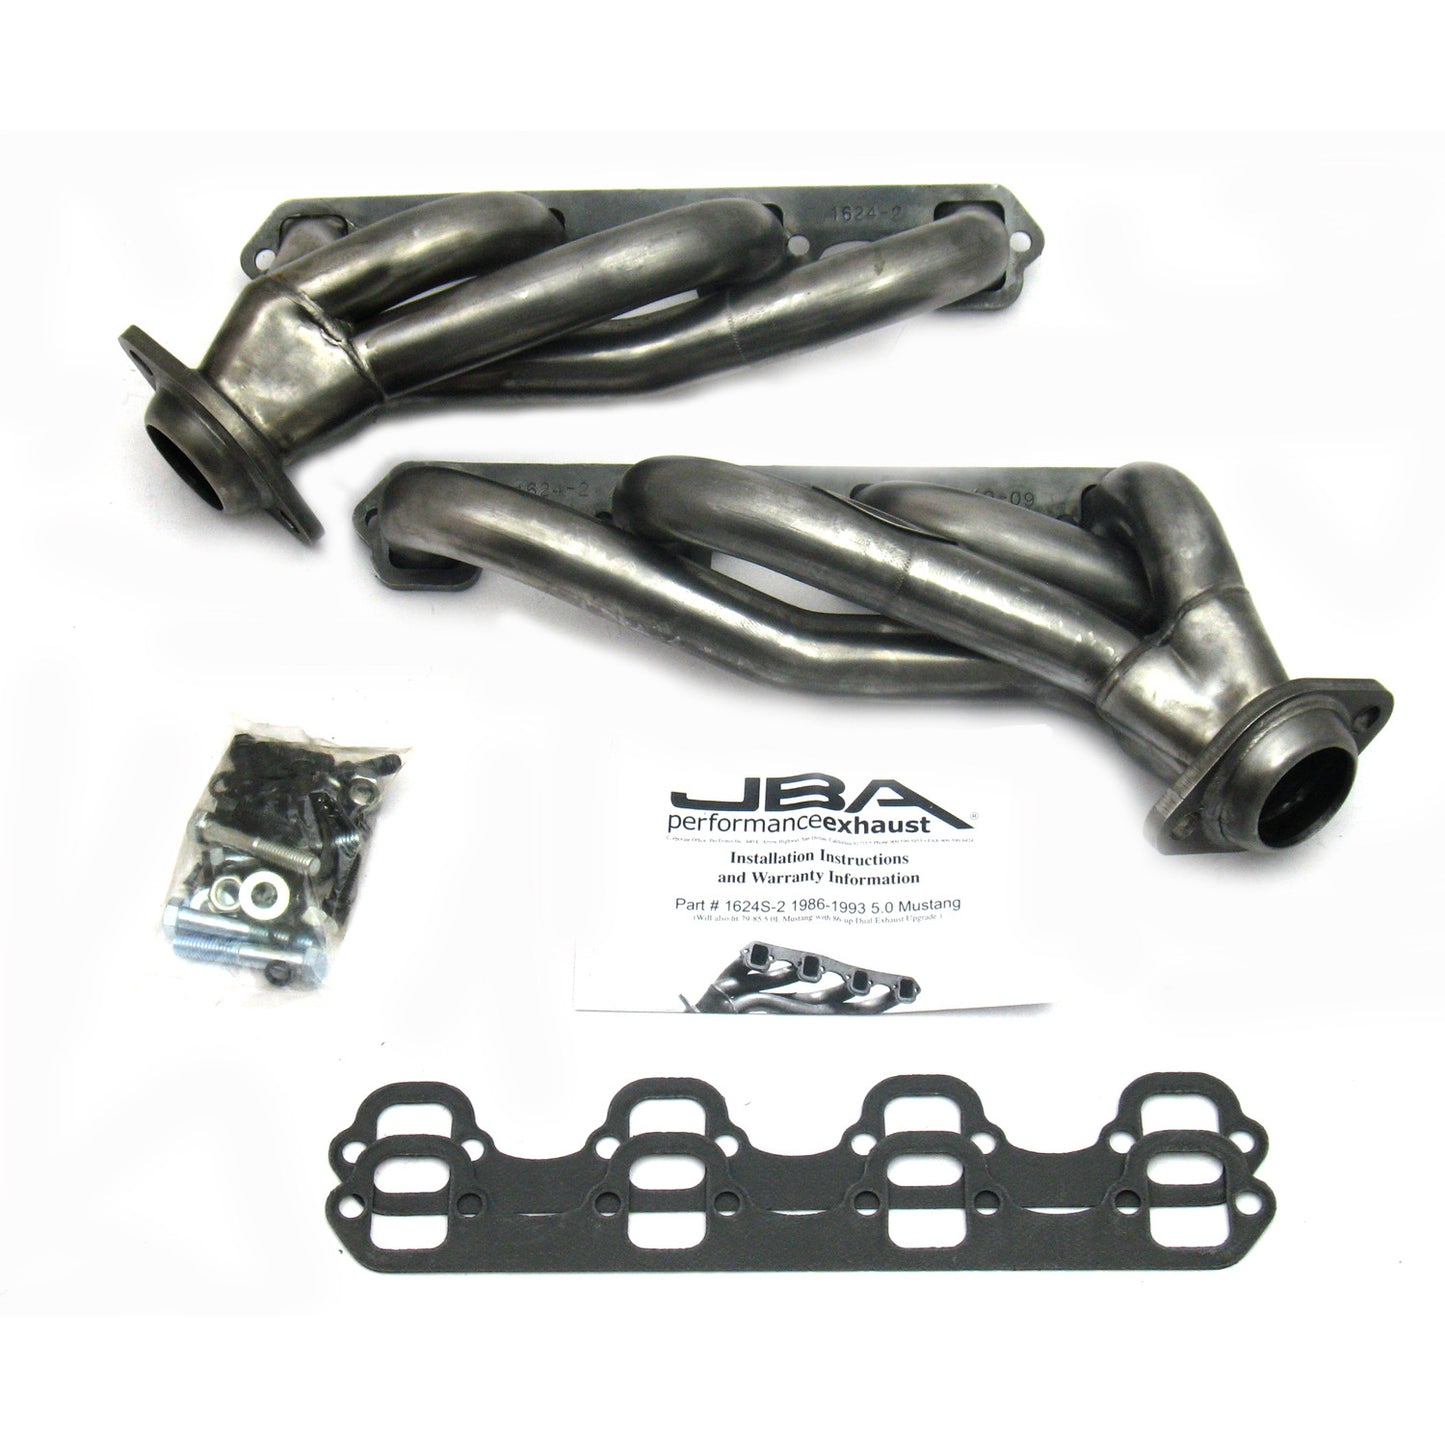 JBA Performance Exhaust 1624S-2 1 5/8" Header Shorty Stainless Steel 86-93 Mustang 5.0L